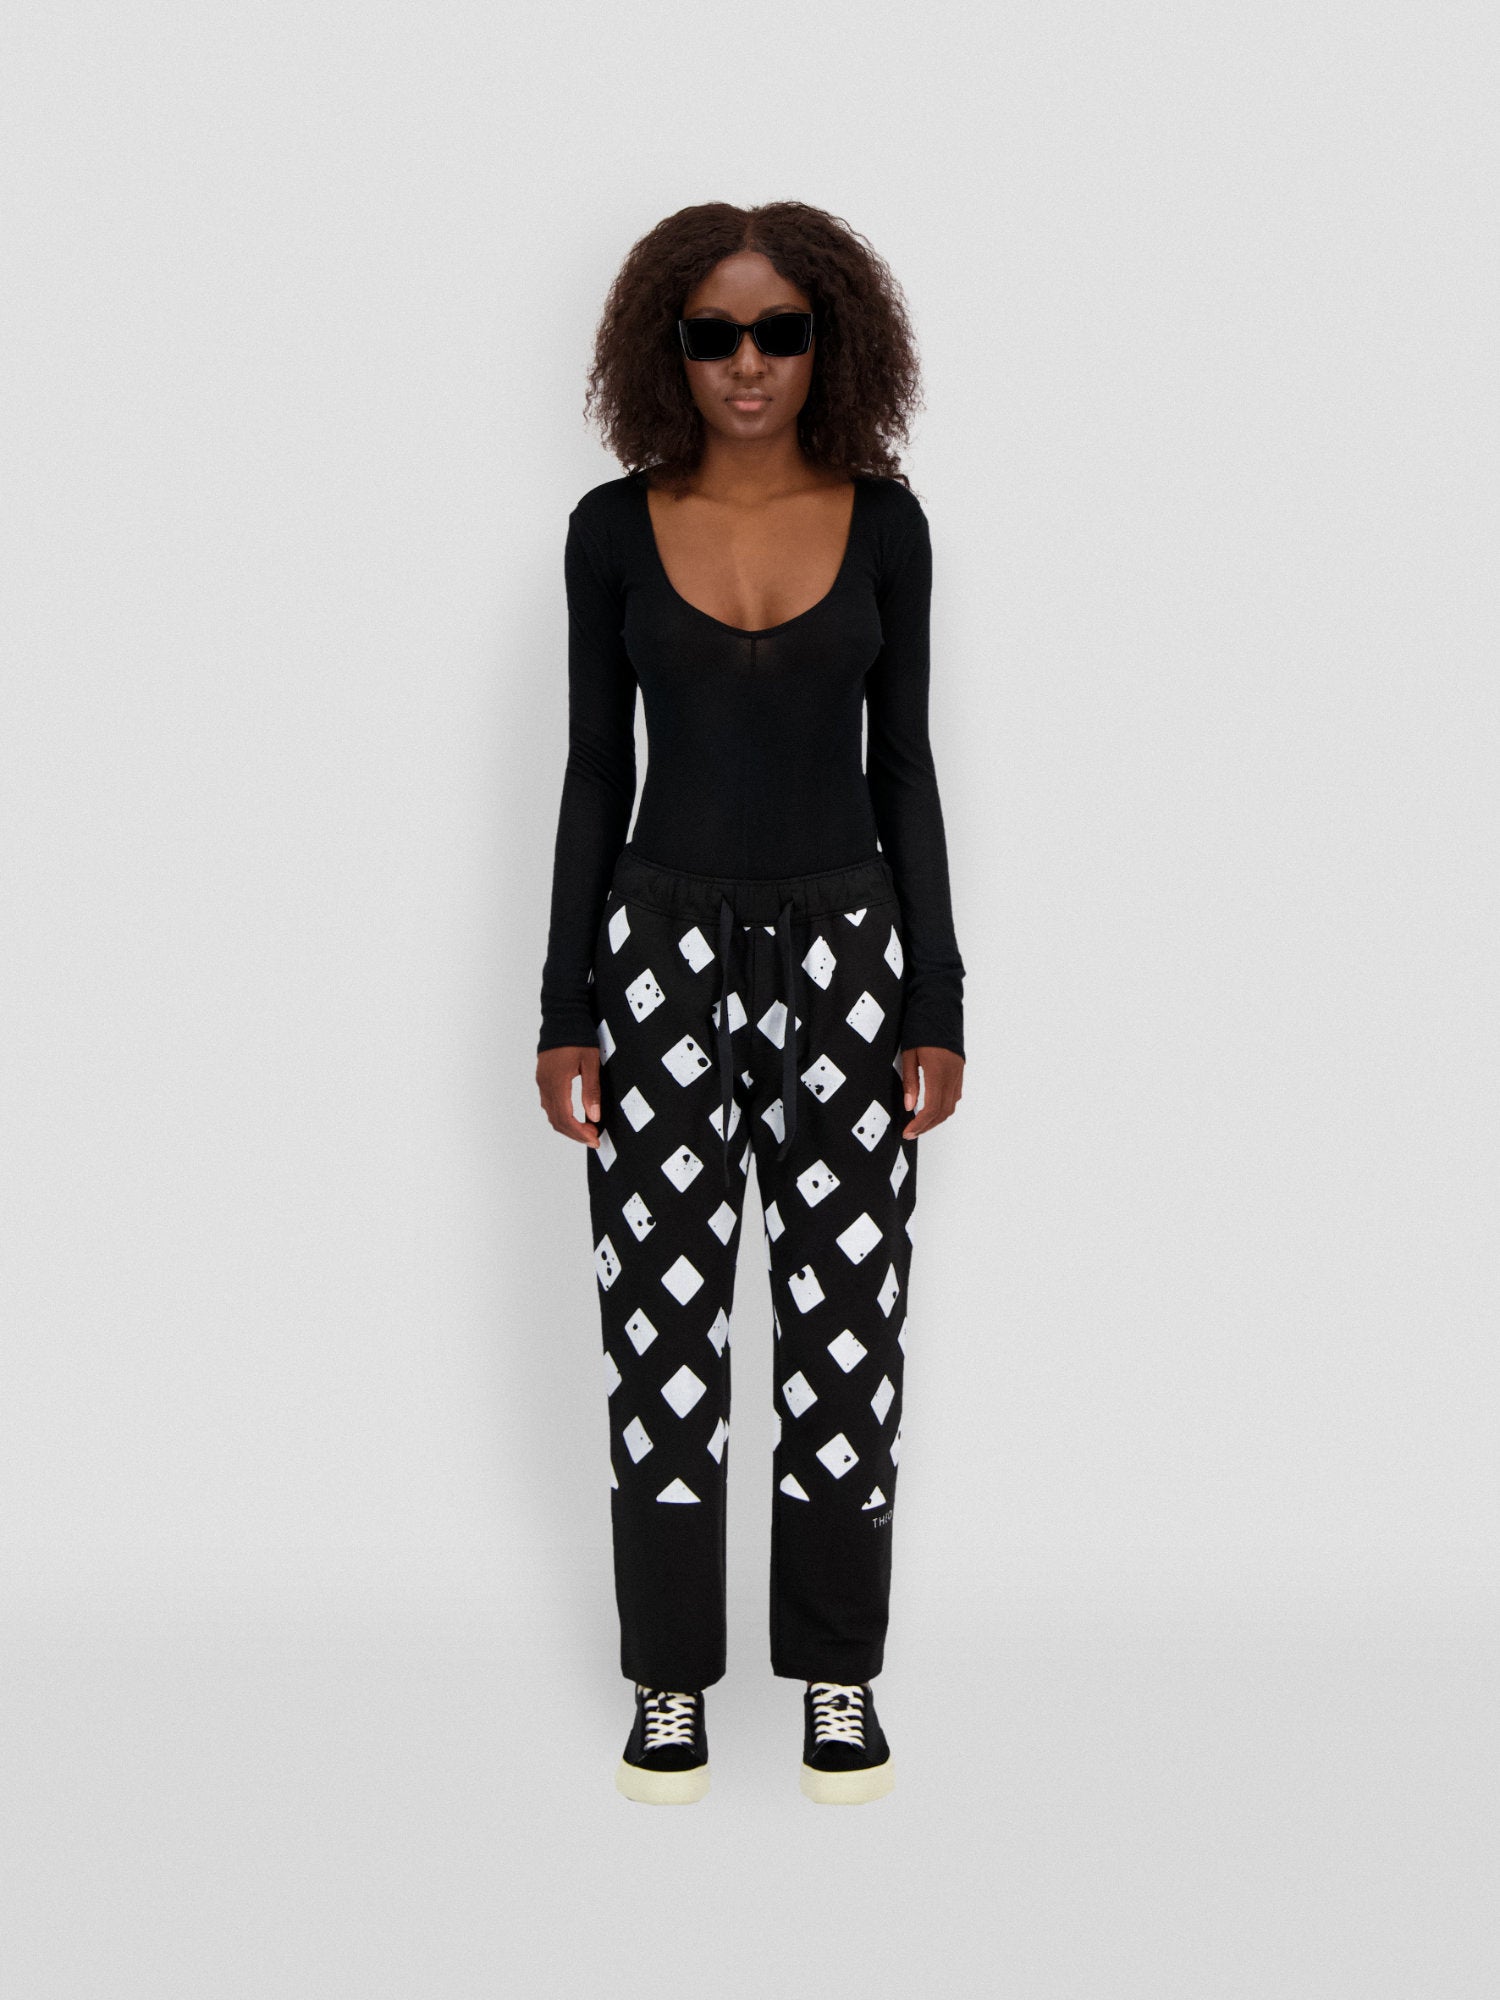 SWEATPANTS WITH A CONTRASTING TEXTURED RHOMBUS PRINT